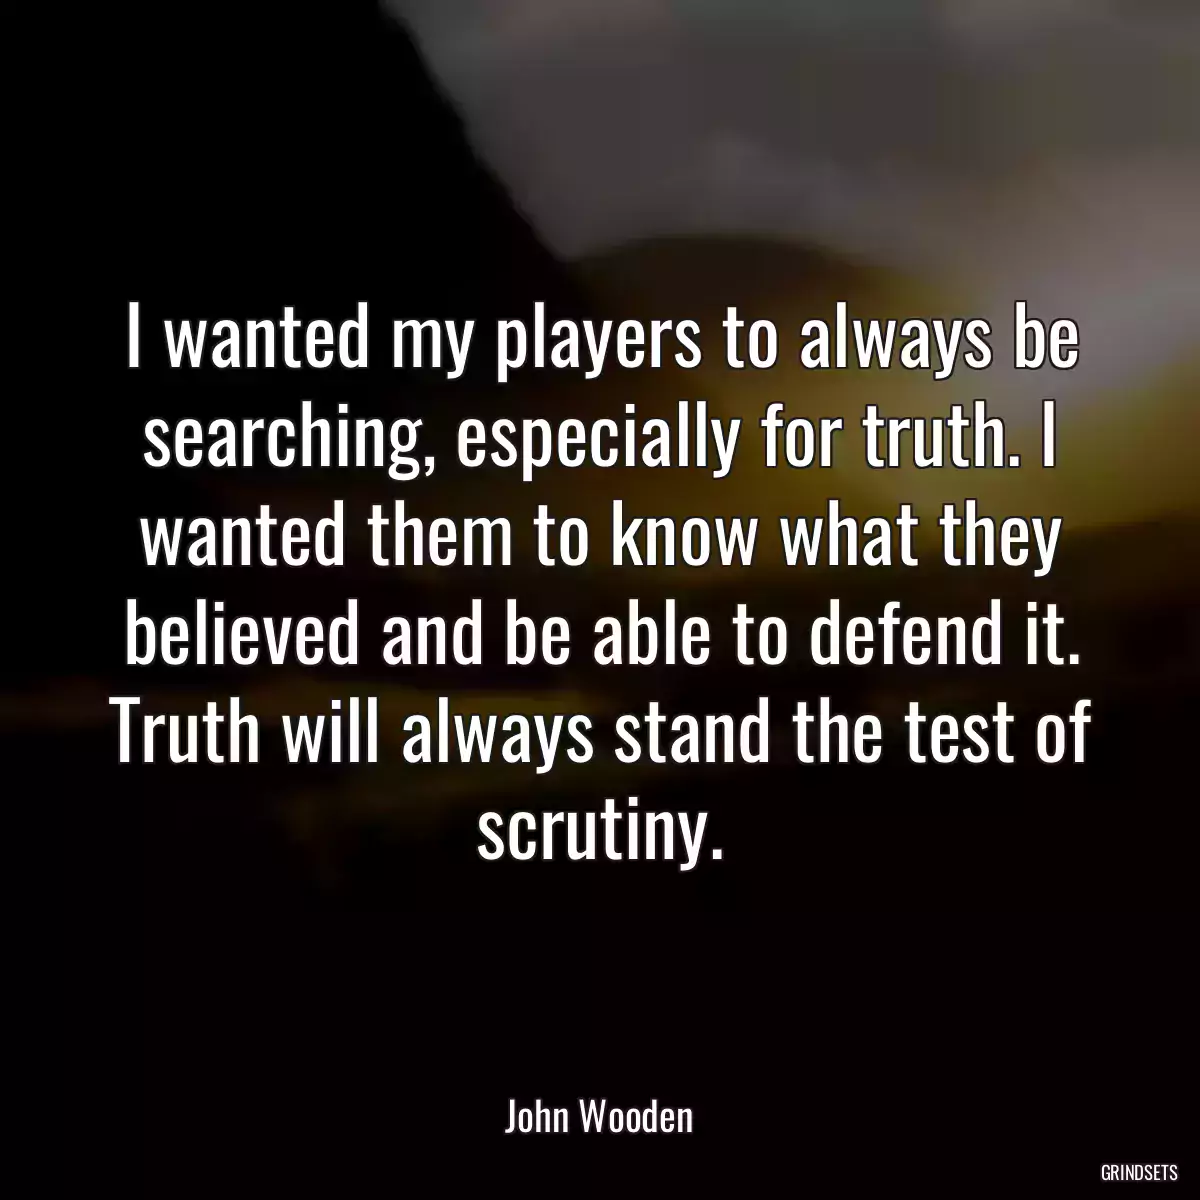 I wanted my players to always be searching, especially for truth. I wanted them to know what they believed and be able to defend it. Truth will always stand the test of scrutiny.